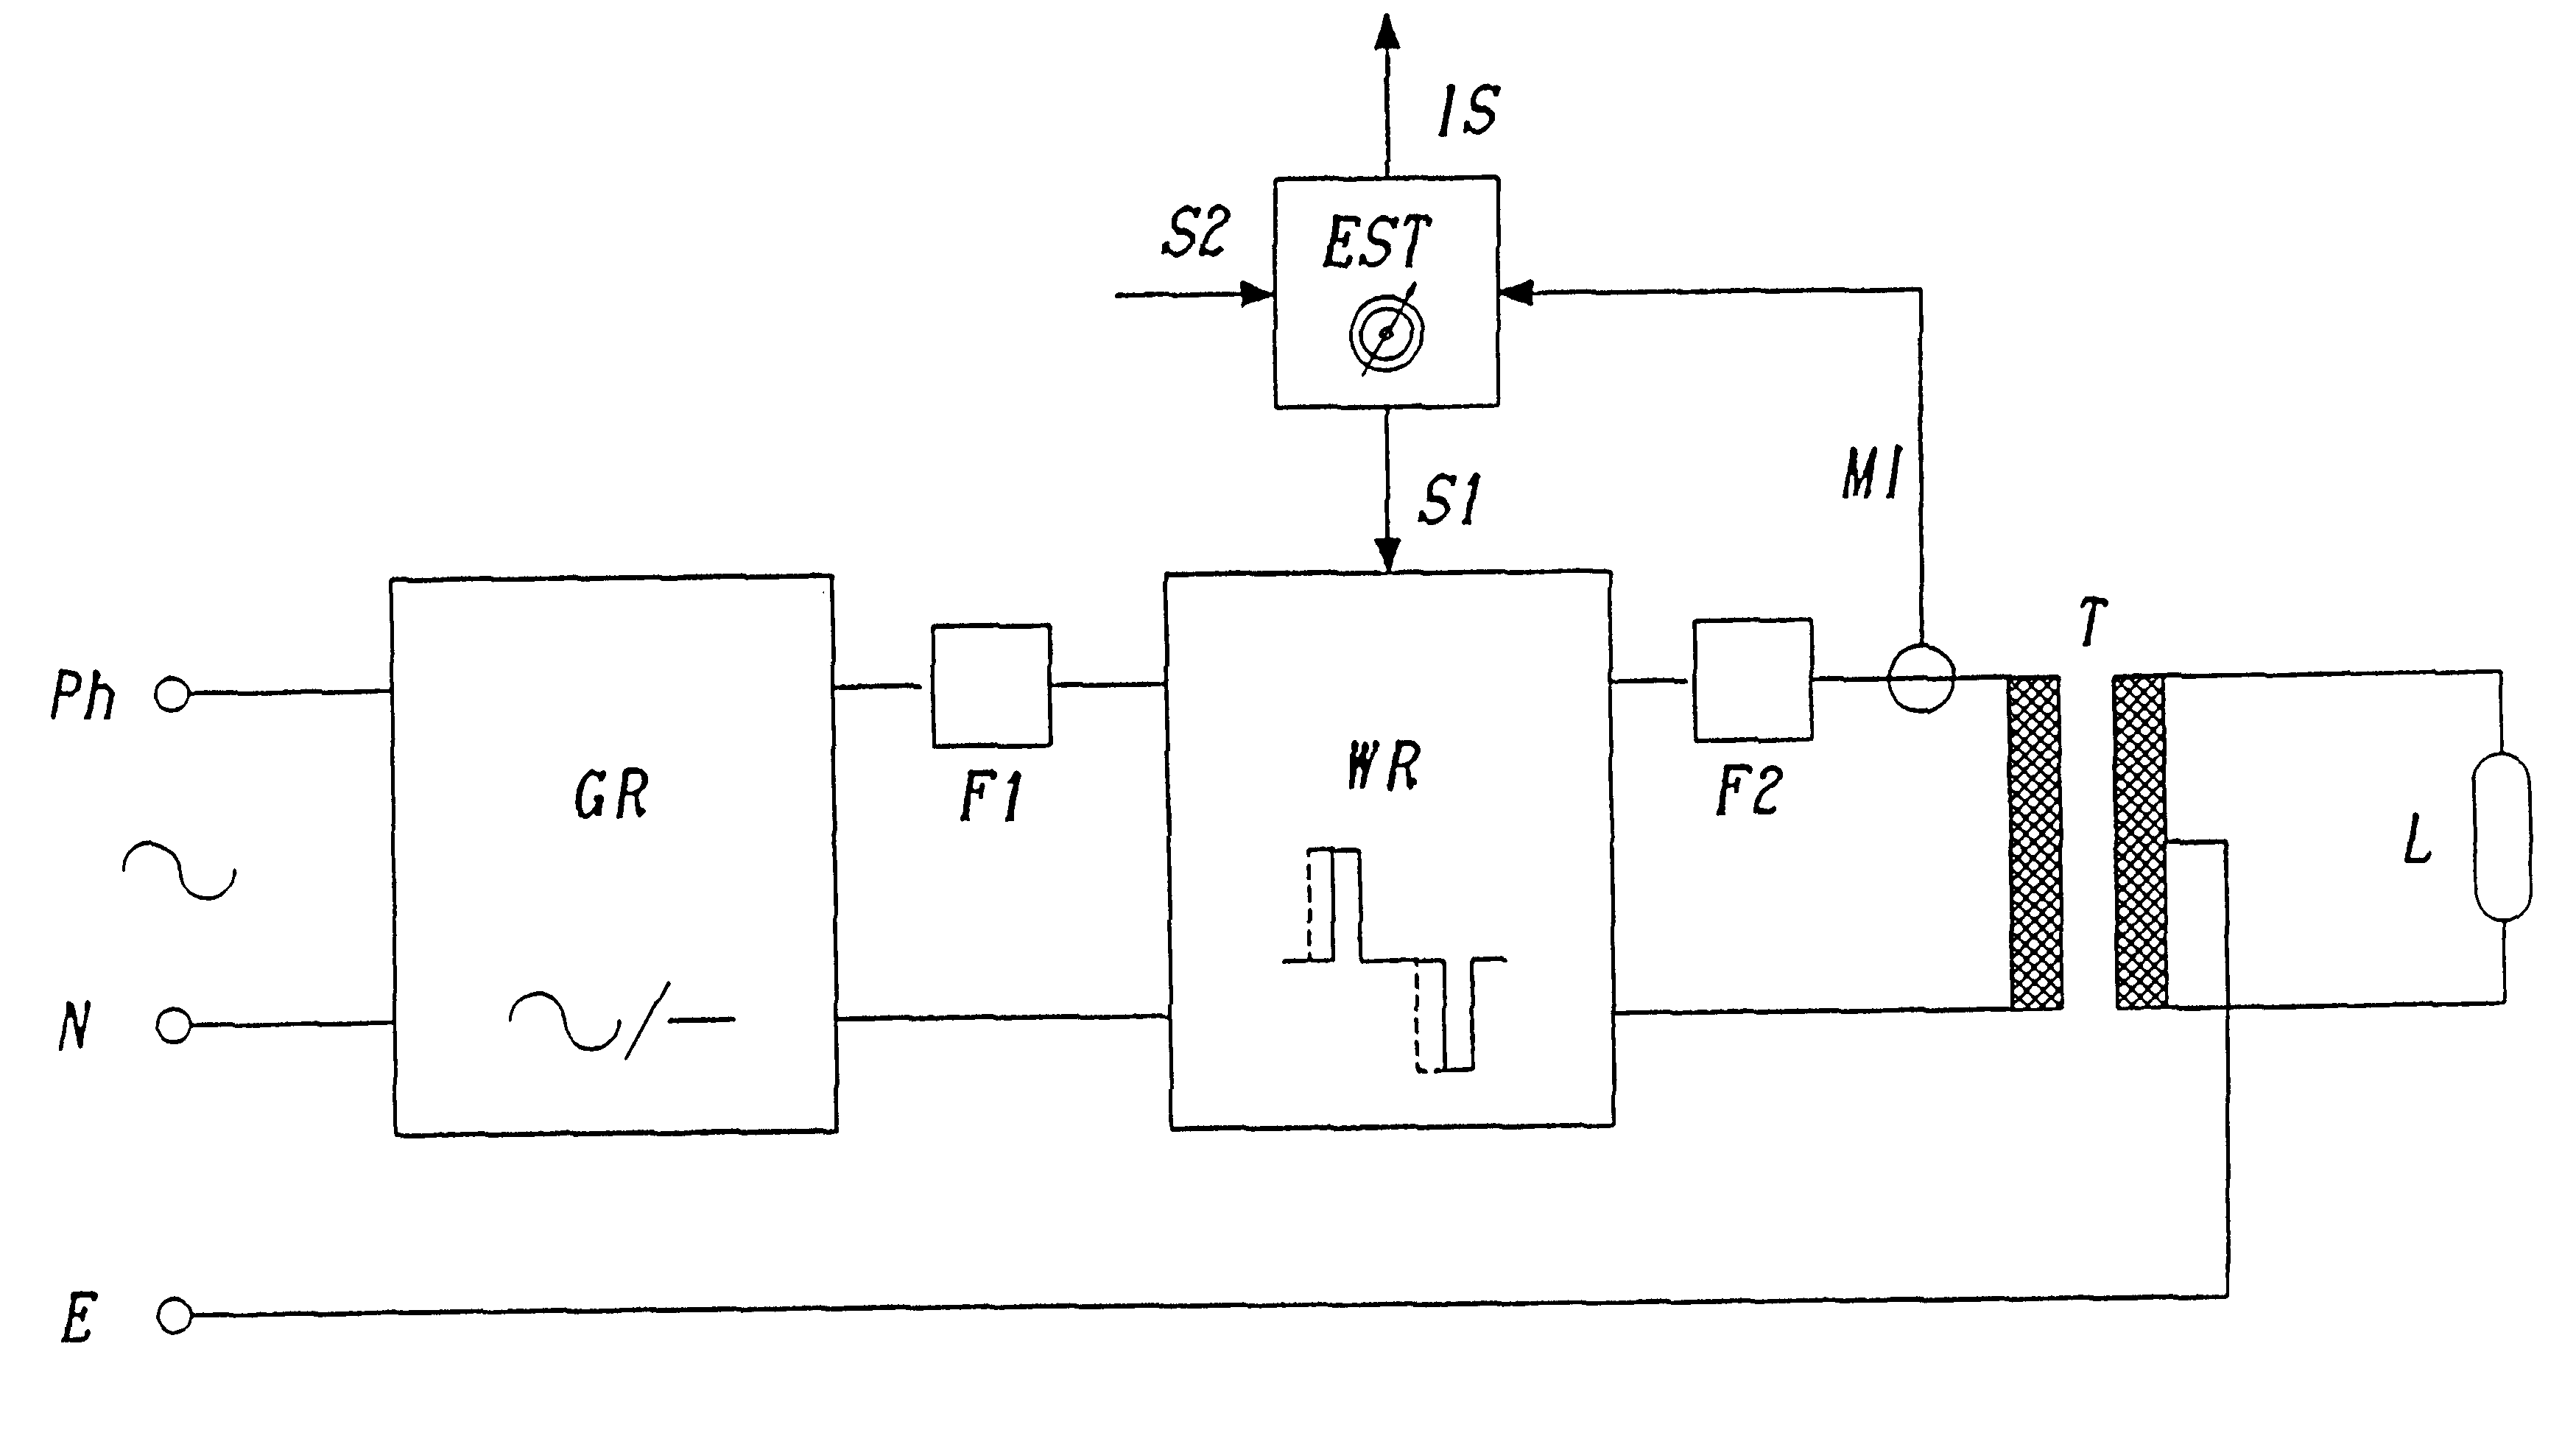 Supply circuit for a fluorescent tube installation